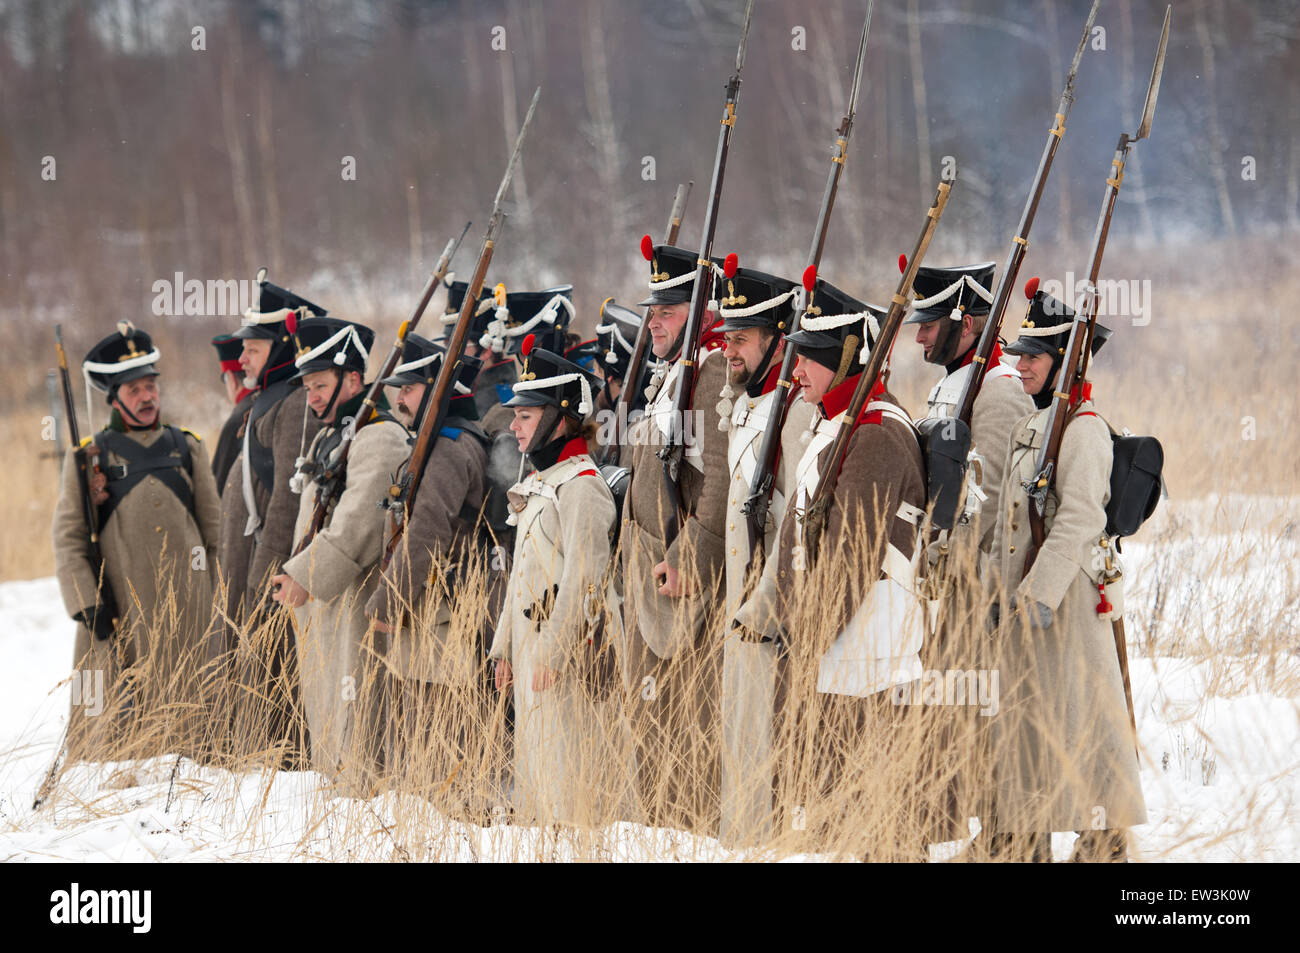 RUSSIA, APRELEVKA - FEBRUARY 7: Unidentified soldiers in row on reenactment of the Napoleonic maneuvers near the Aprelevka city, in 1812. Moscow region, Aprelevka, 7 February, 2015, Russia Stock Photo